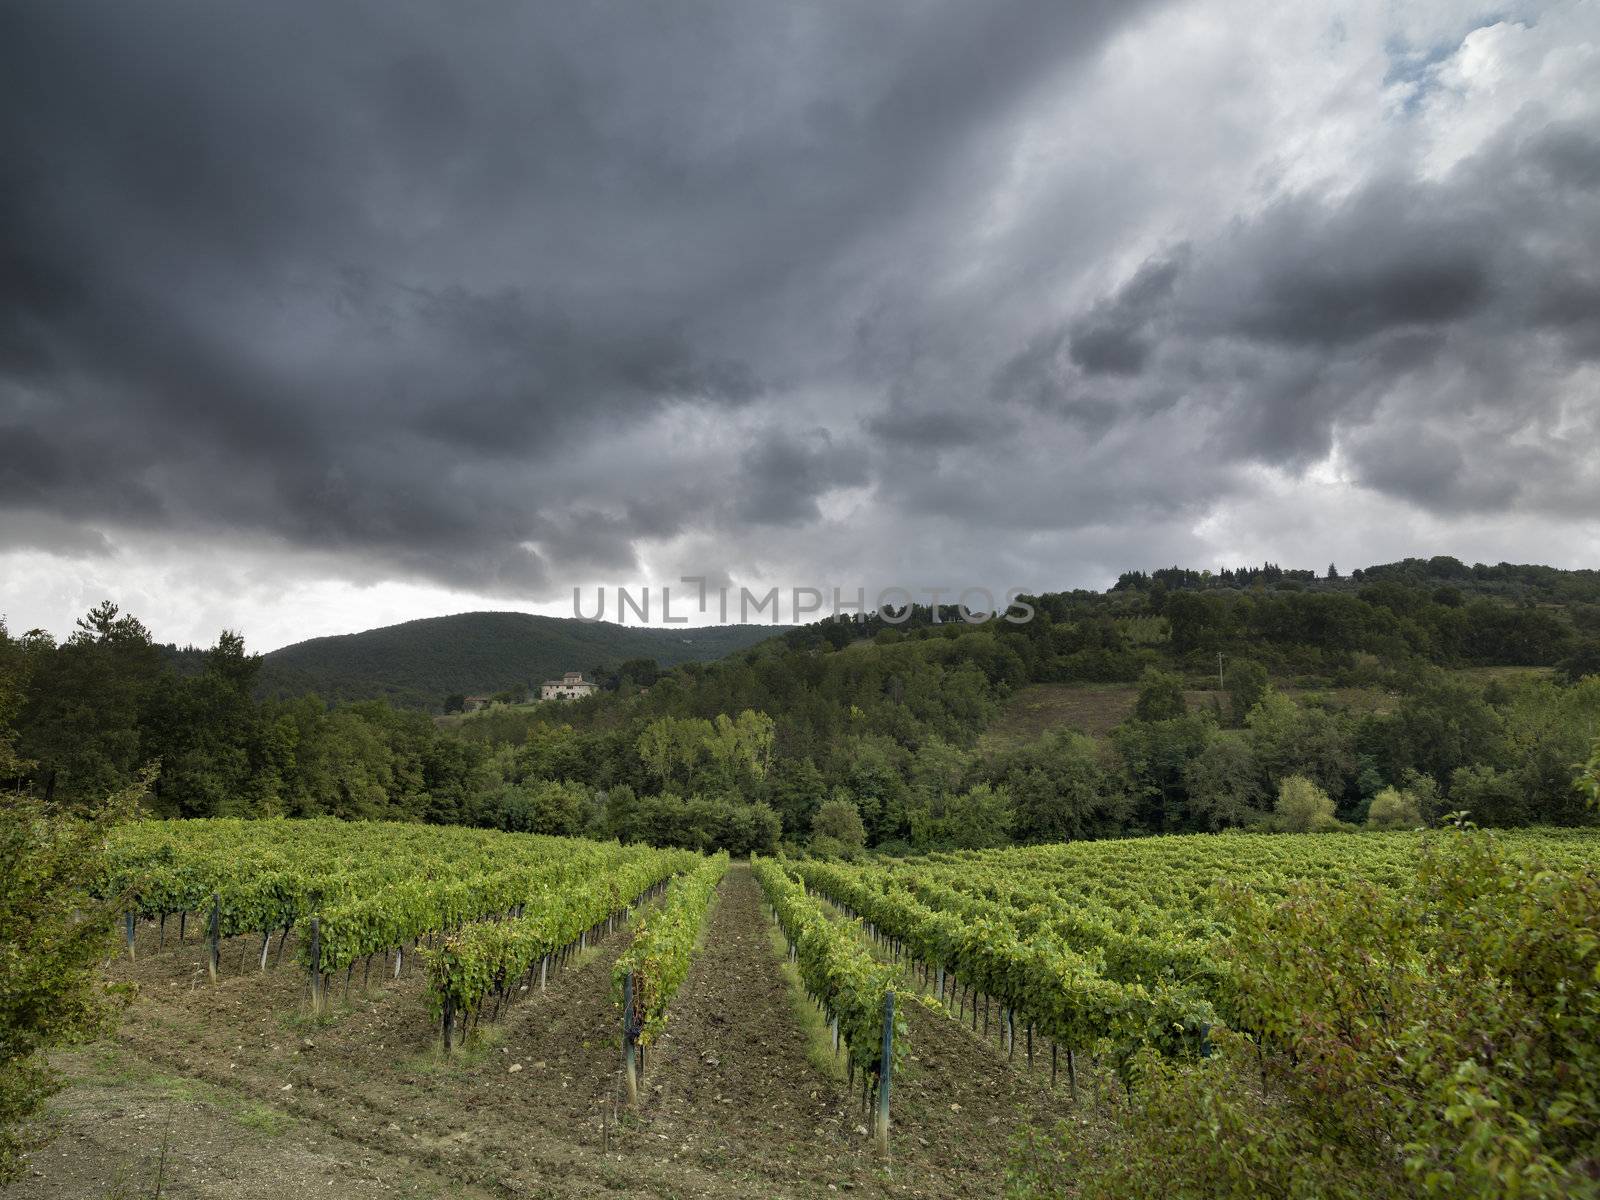 trees under the dark clouds in tuscany